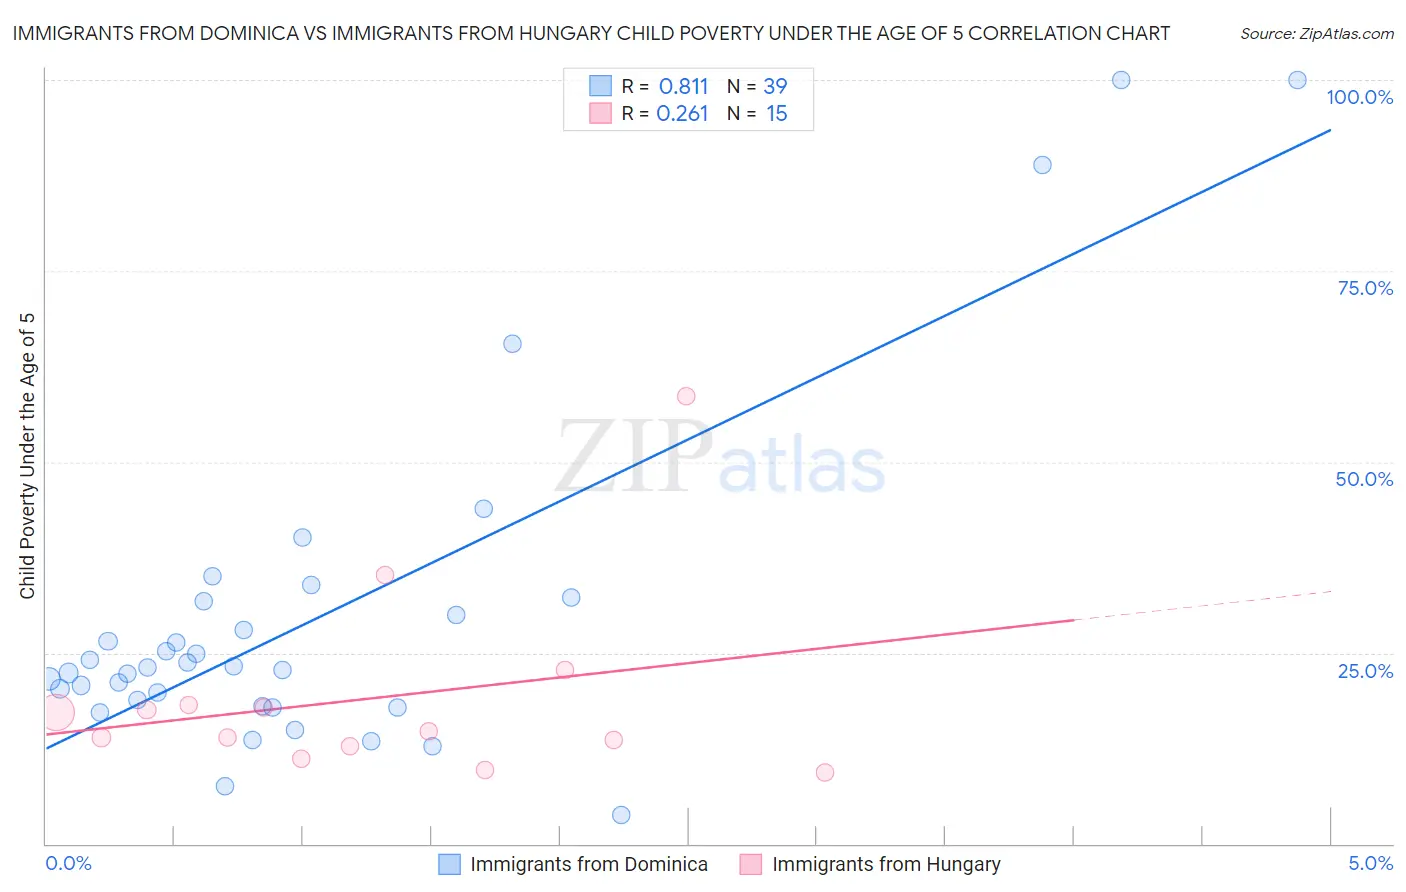 Immigrants from Dominica vs Immigrants from Hungary Child Poverty Under the Age of 5